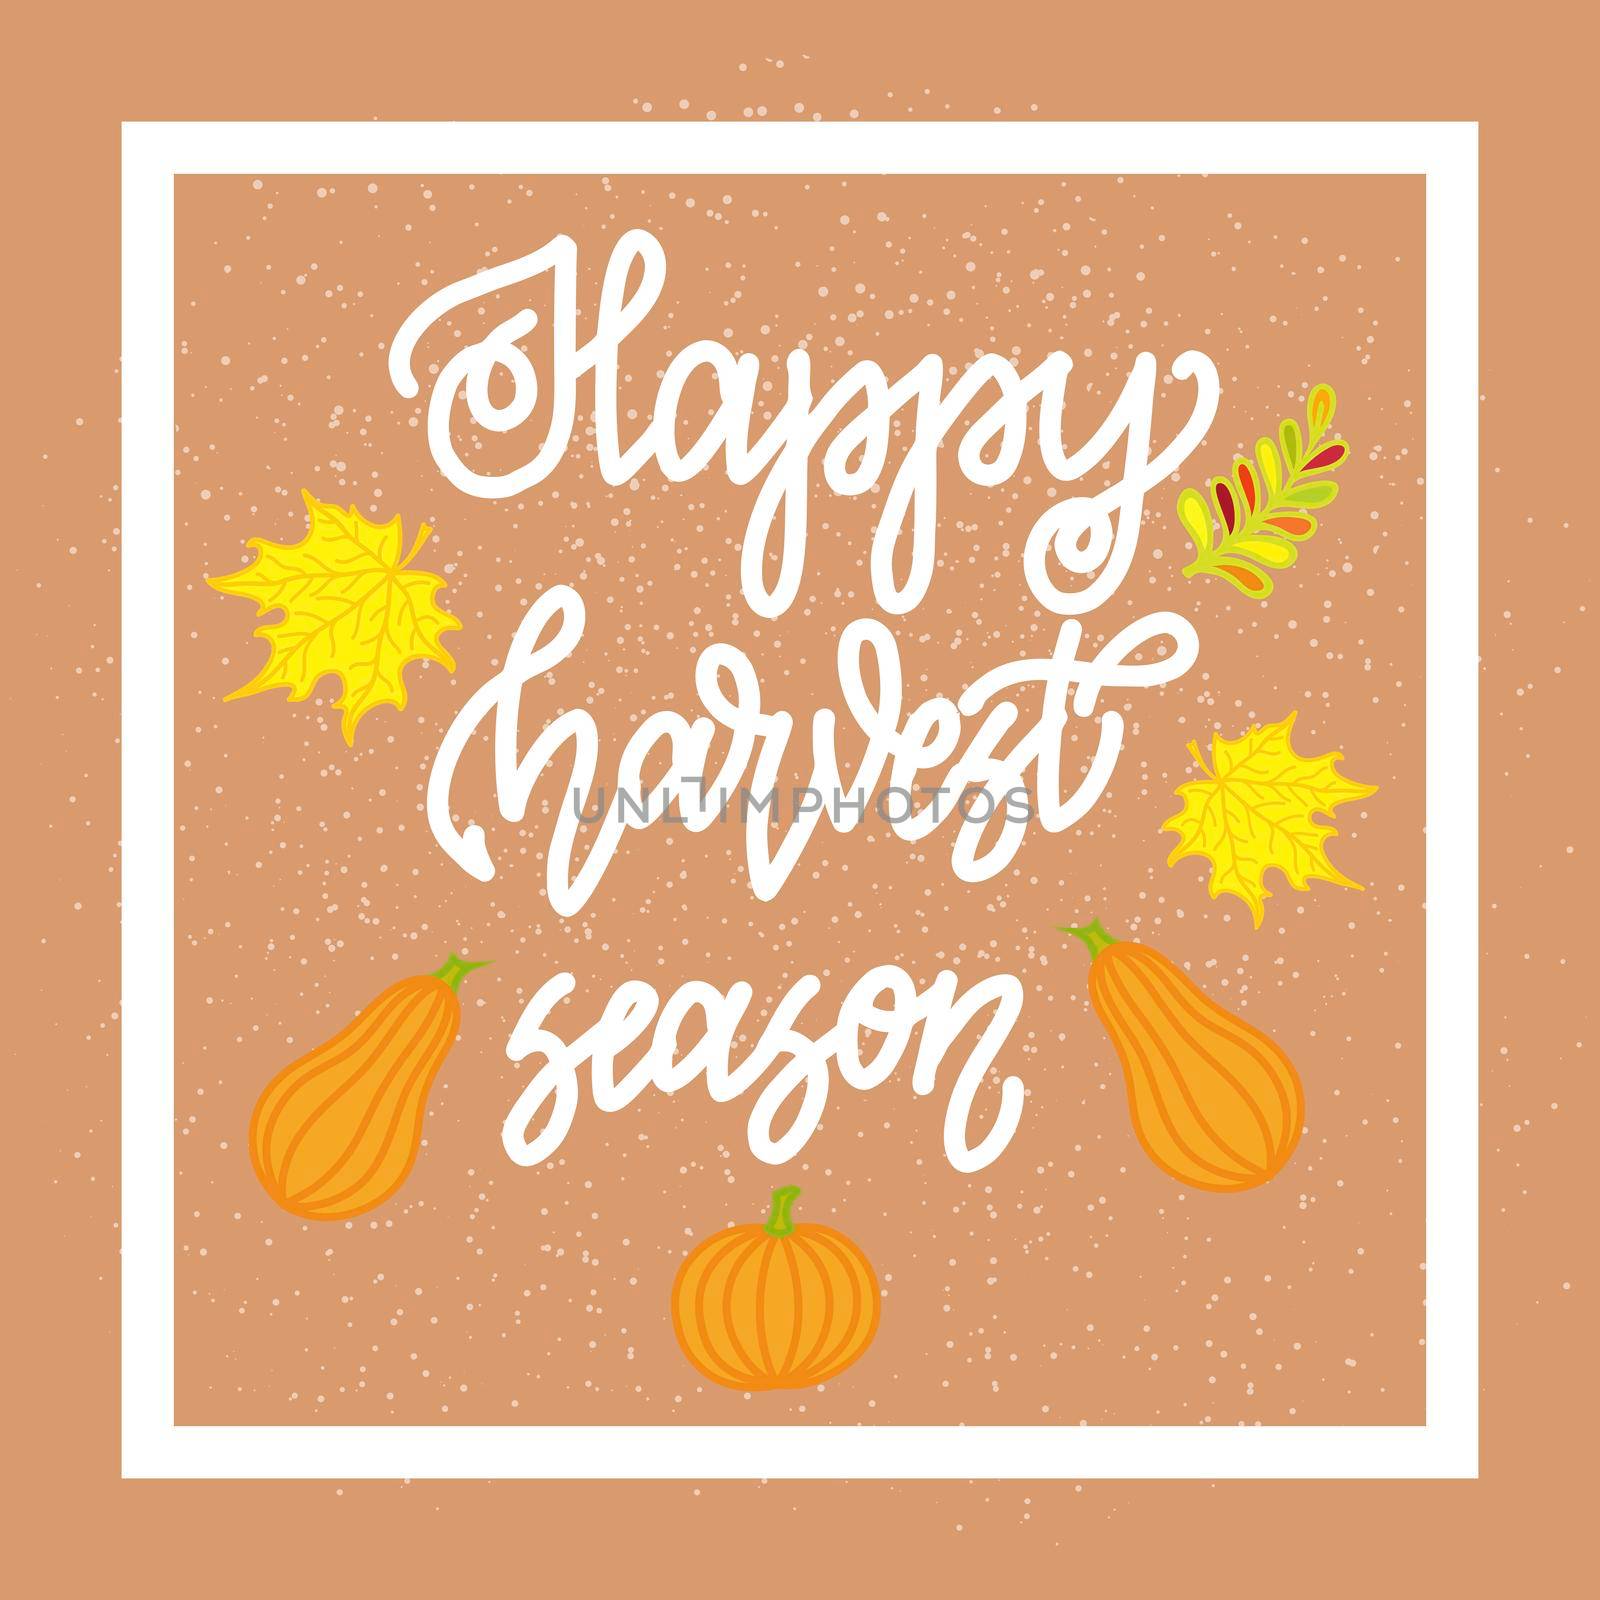 Happy harvest season. Handwritten lettering on beige background. illustration for posters, cards and much more.